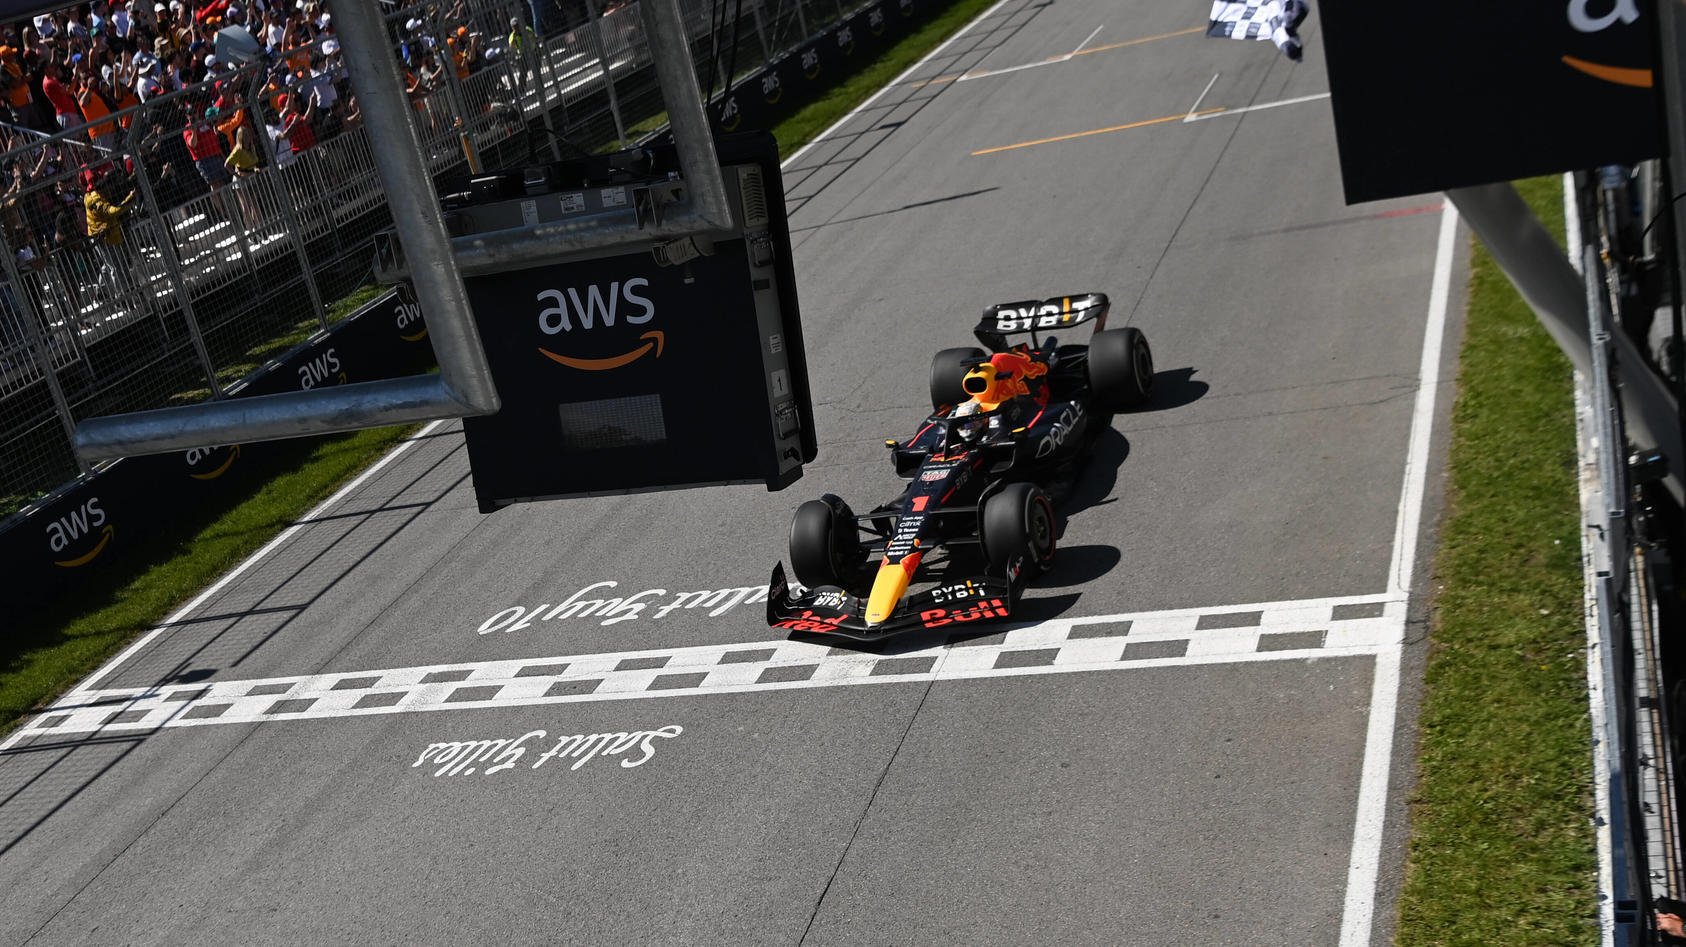  Formula 1 2022: Canadian GP CIRCUIT GILLES-VILLENEUVE, CANADA - JUNE 19: Max Verstappen, Red Bull Racing RB18, 1st position, takes the chequered flag during the Canadian GP at Circuit Gilles-Villeneuve on Sunday June 19, 2022 in Montreal, Canada. Ph